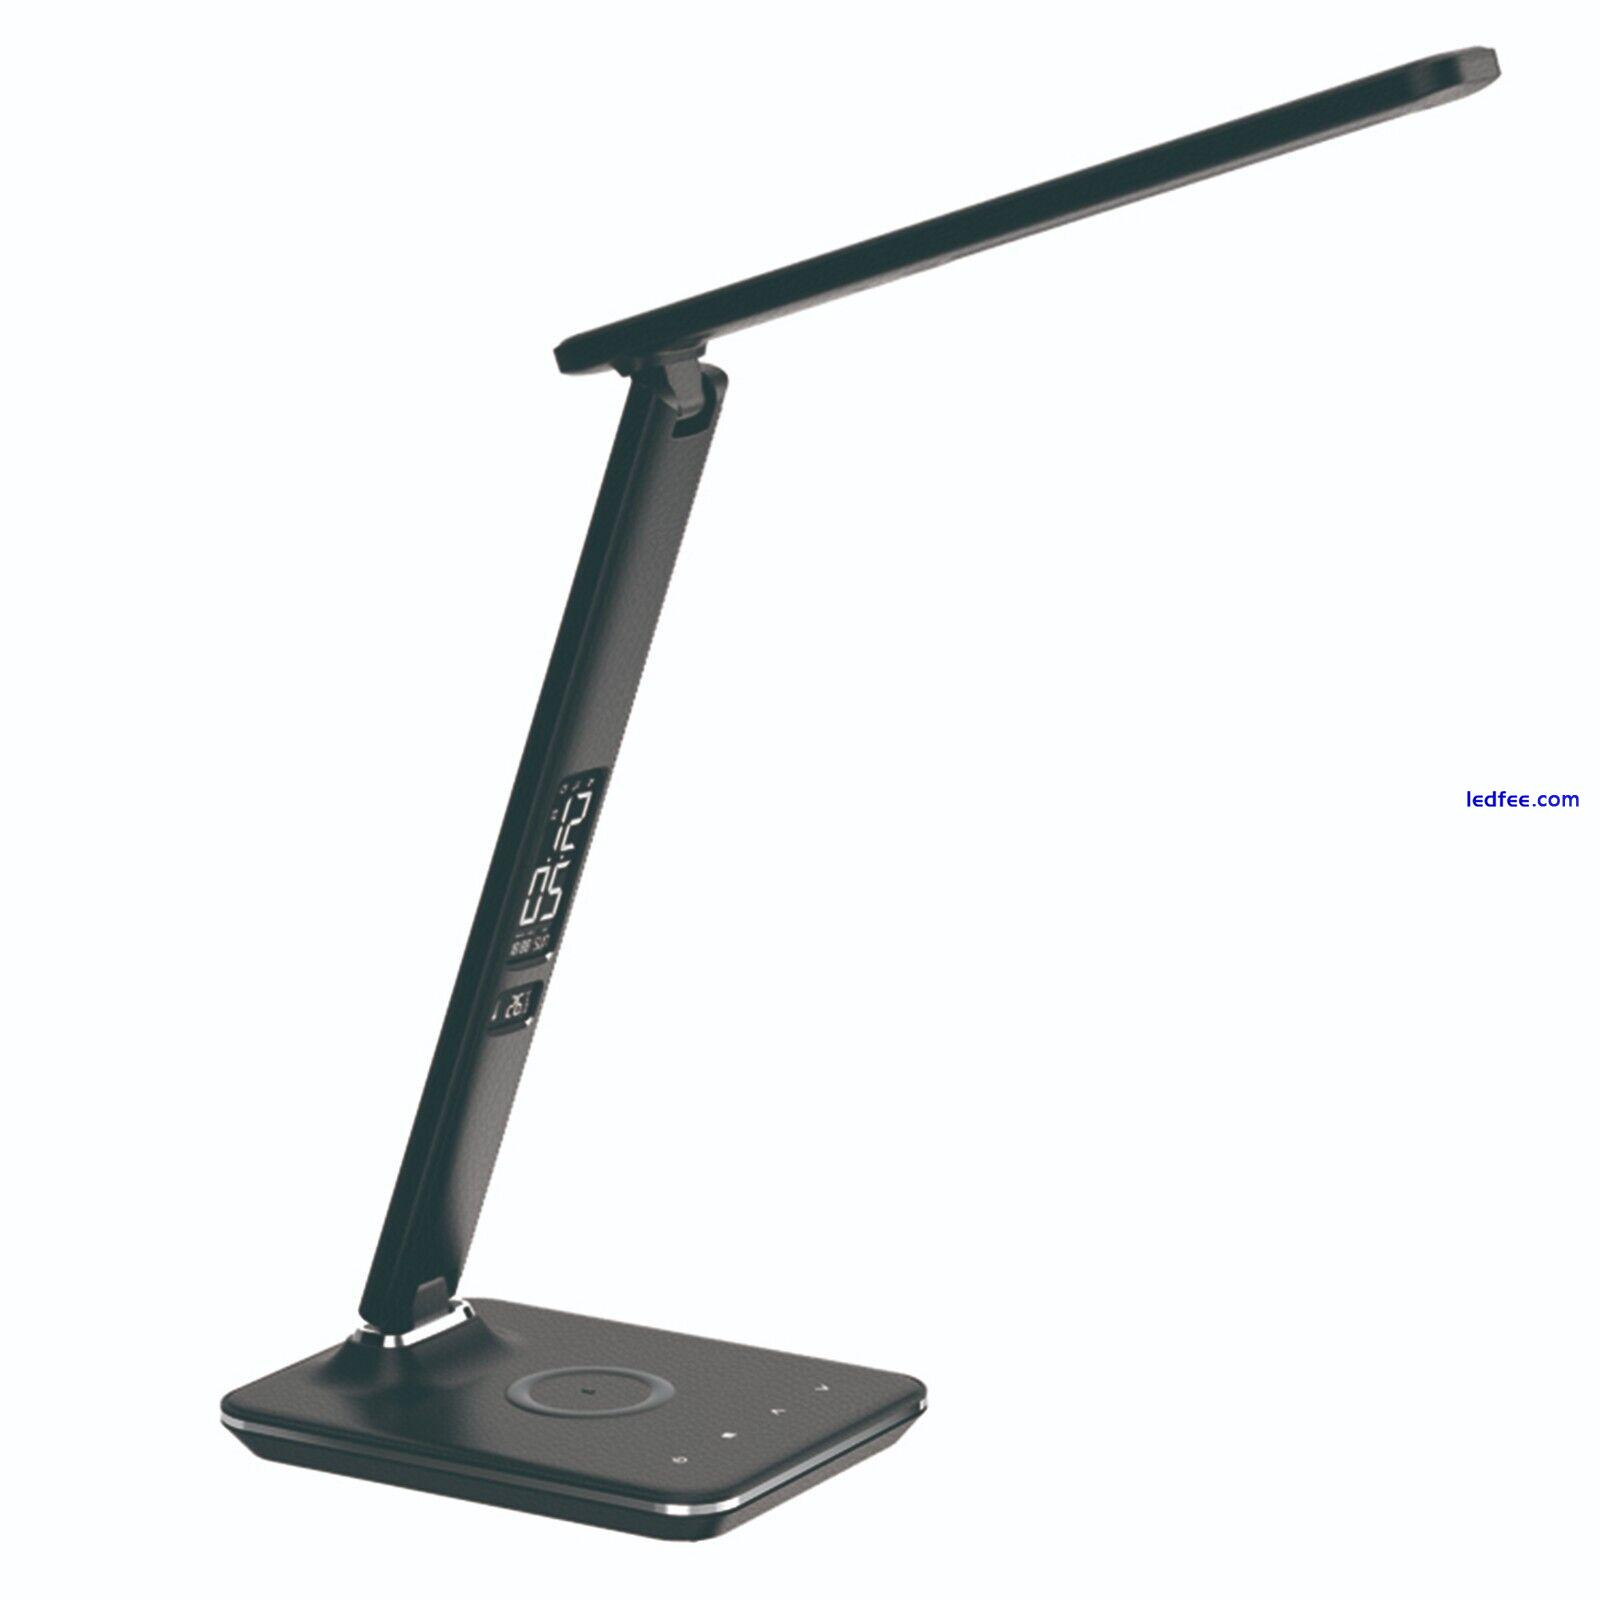 Groov-e ARES LED Desk Lamp with Wireless Charger Pad, Clock and Alarm Black 2 